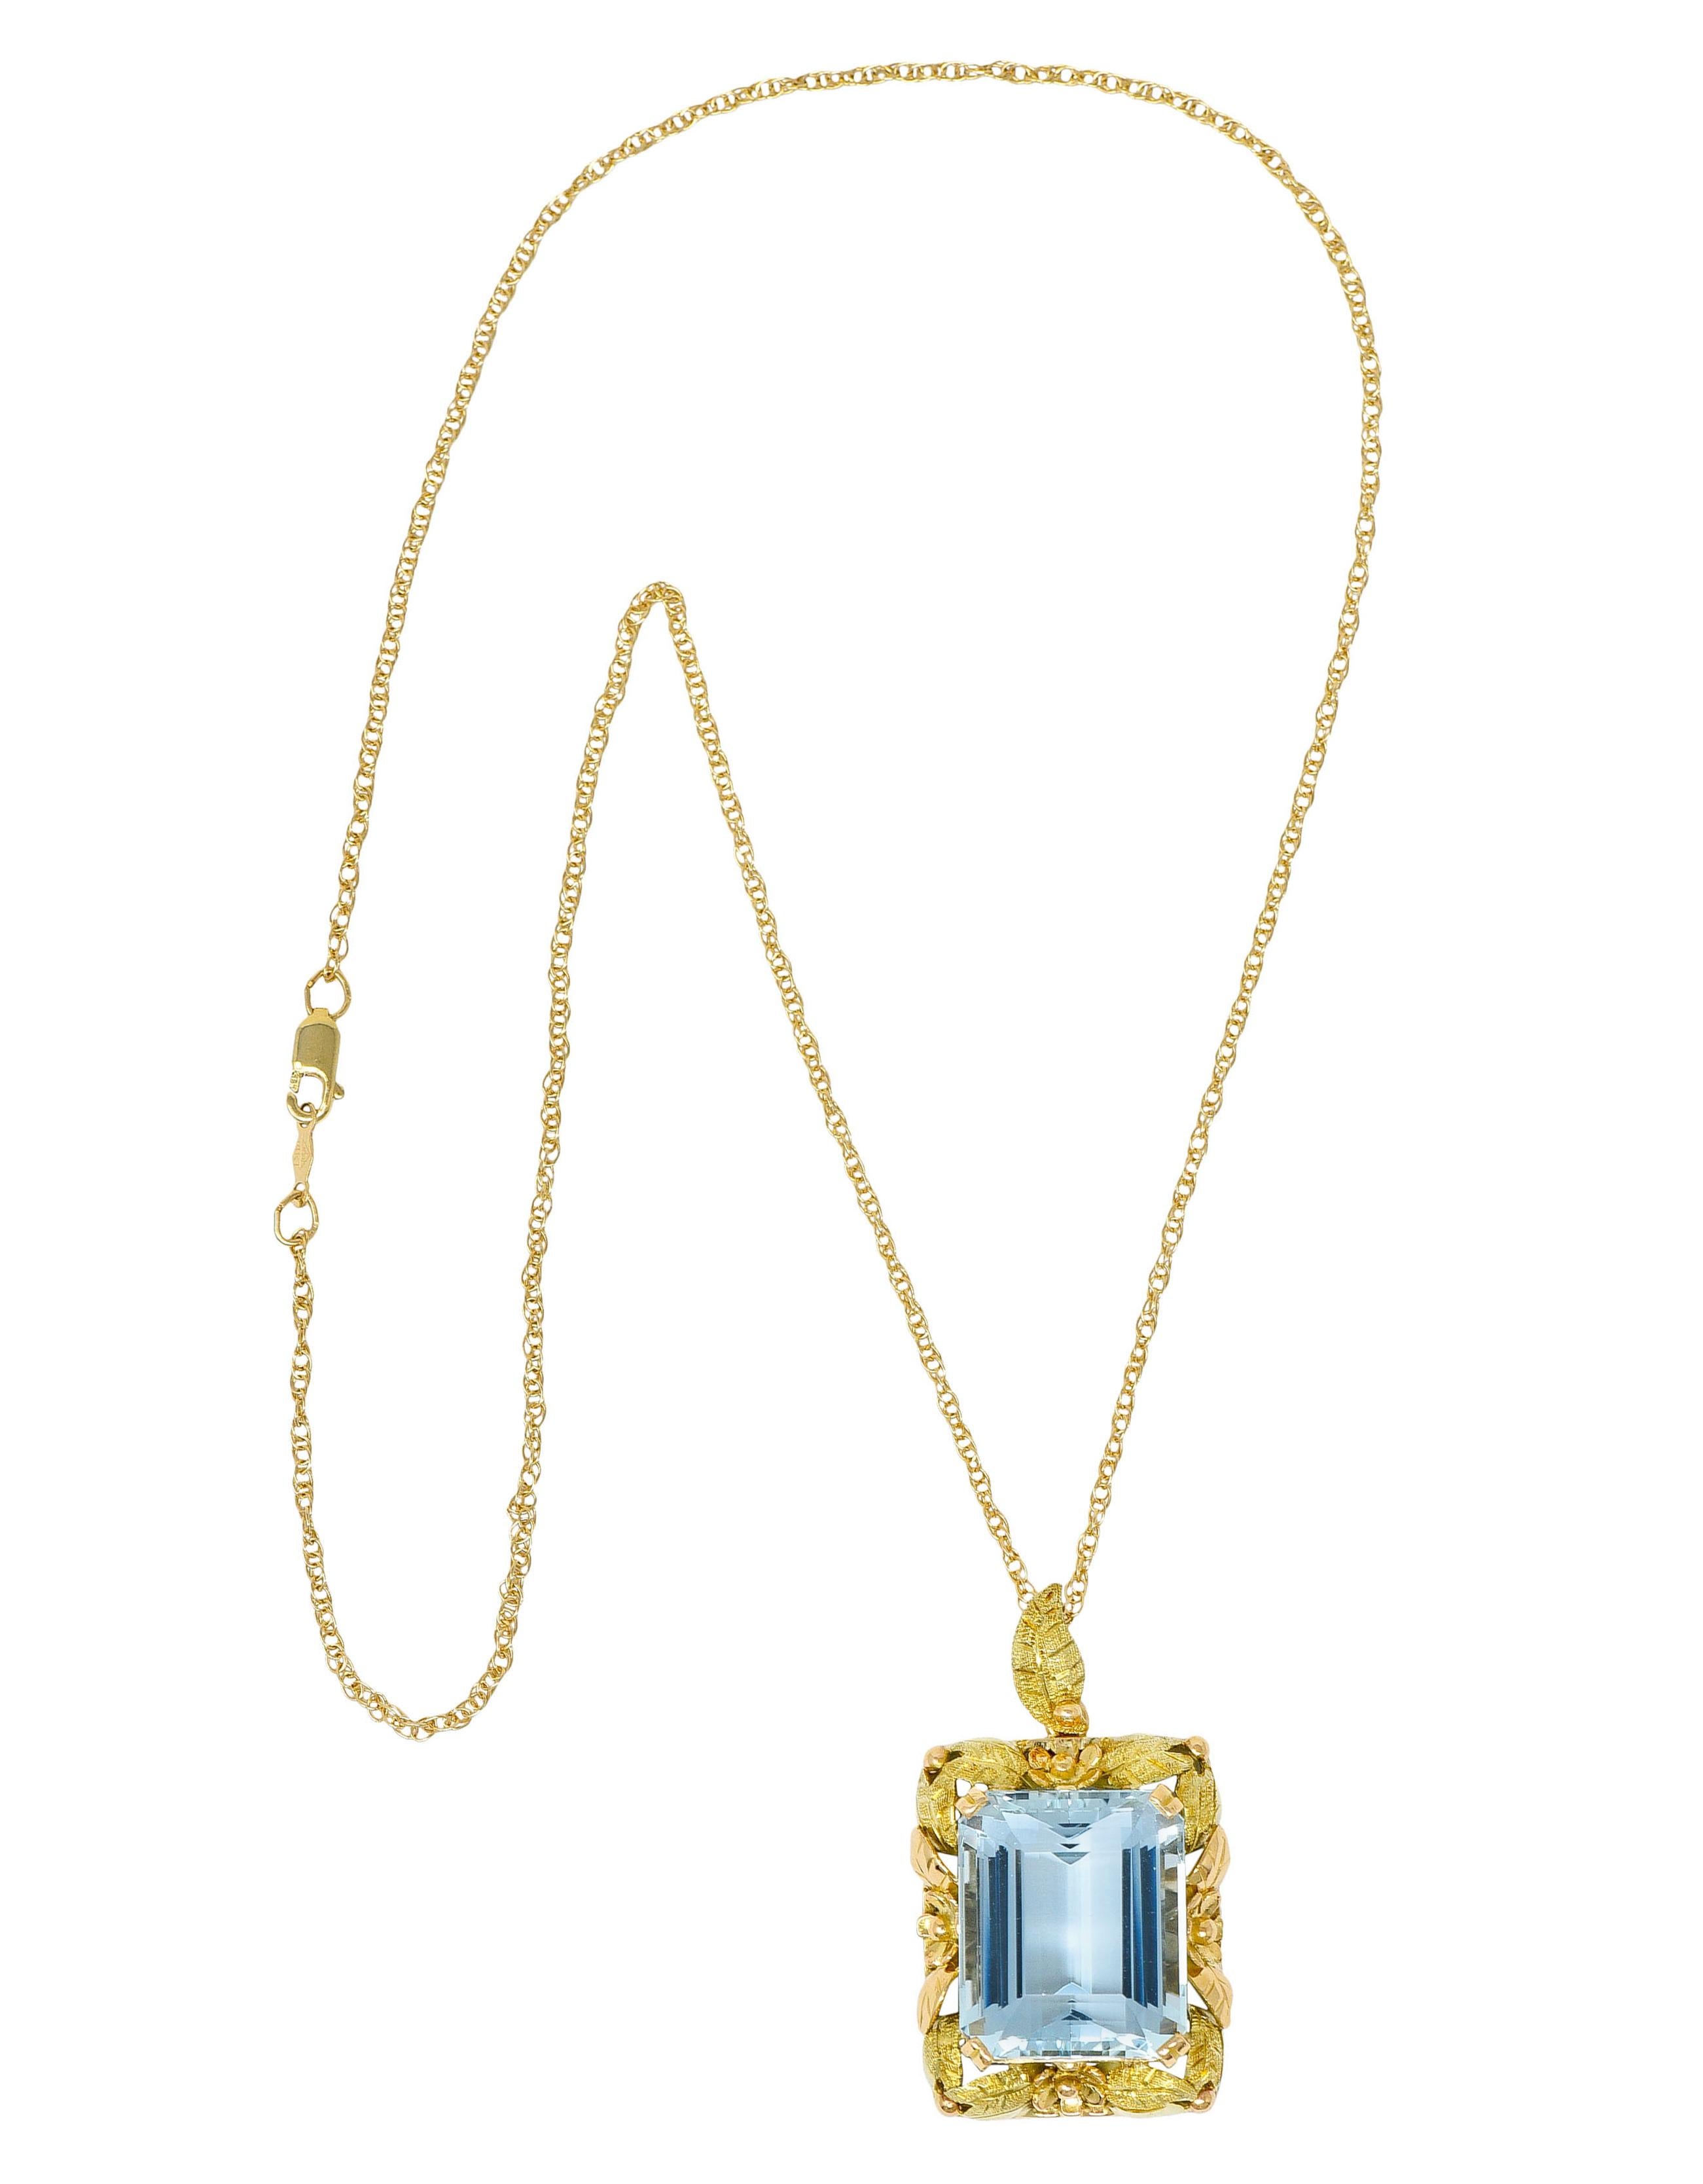 Featuring an emerald cut aquamarine weighing approximately 20.95 carats

Set by wide split prongs and exhibits transparent medium light sky blue color

Surrounded by flourishing florals and foliate of rose, green, and yellow gold

Suspending from a